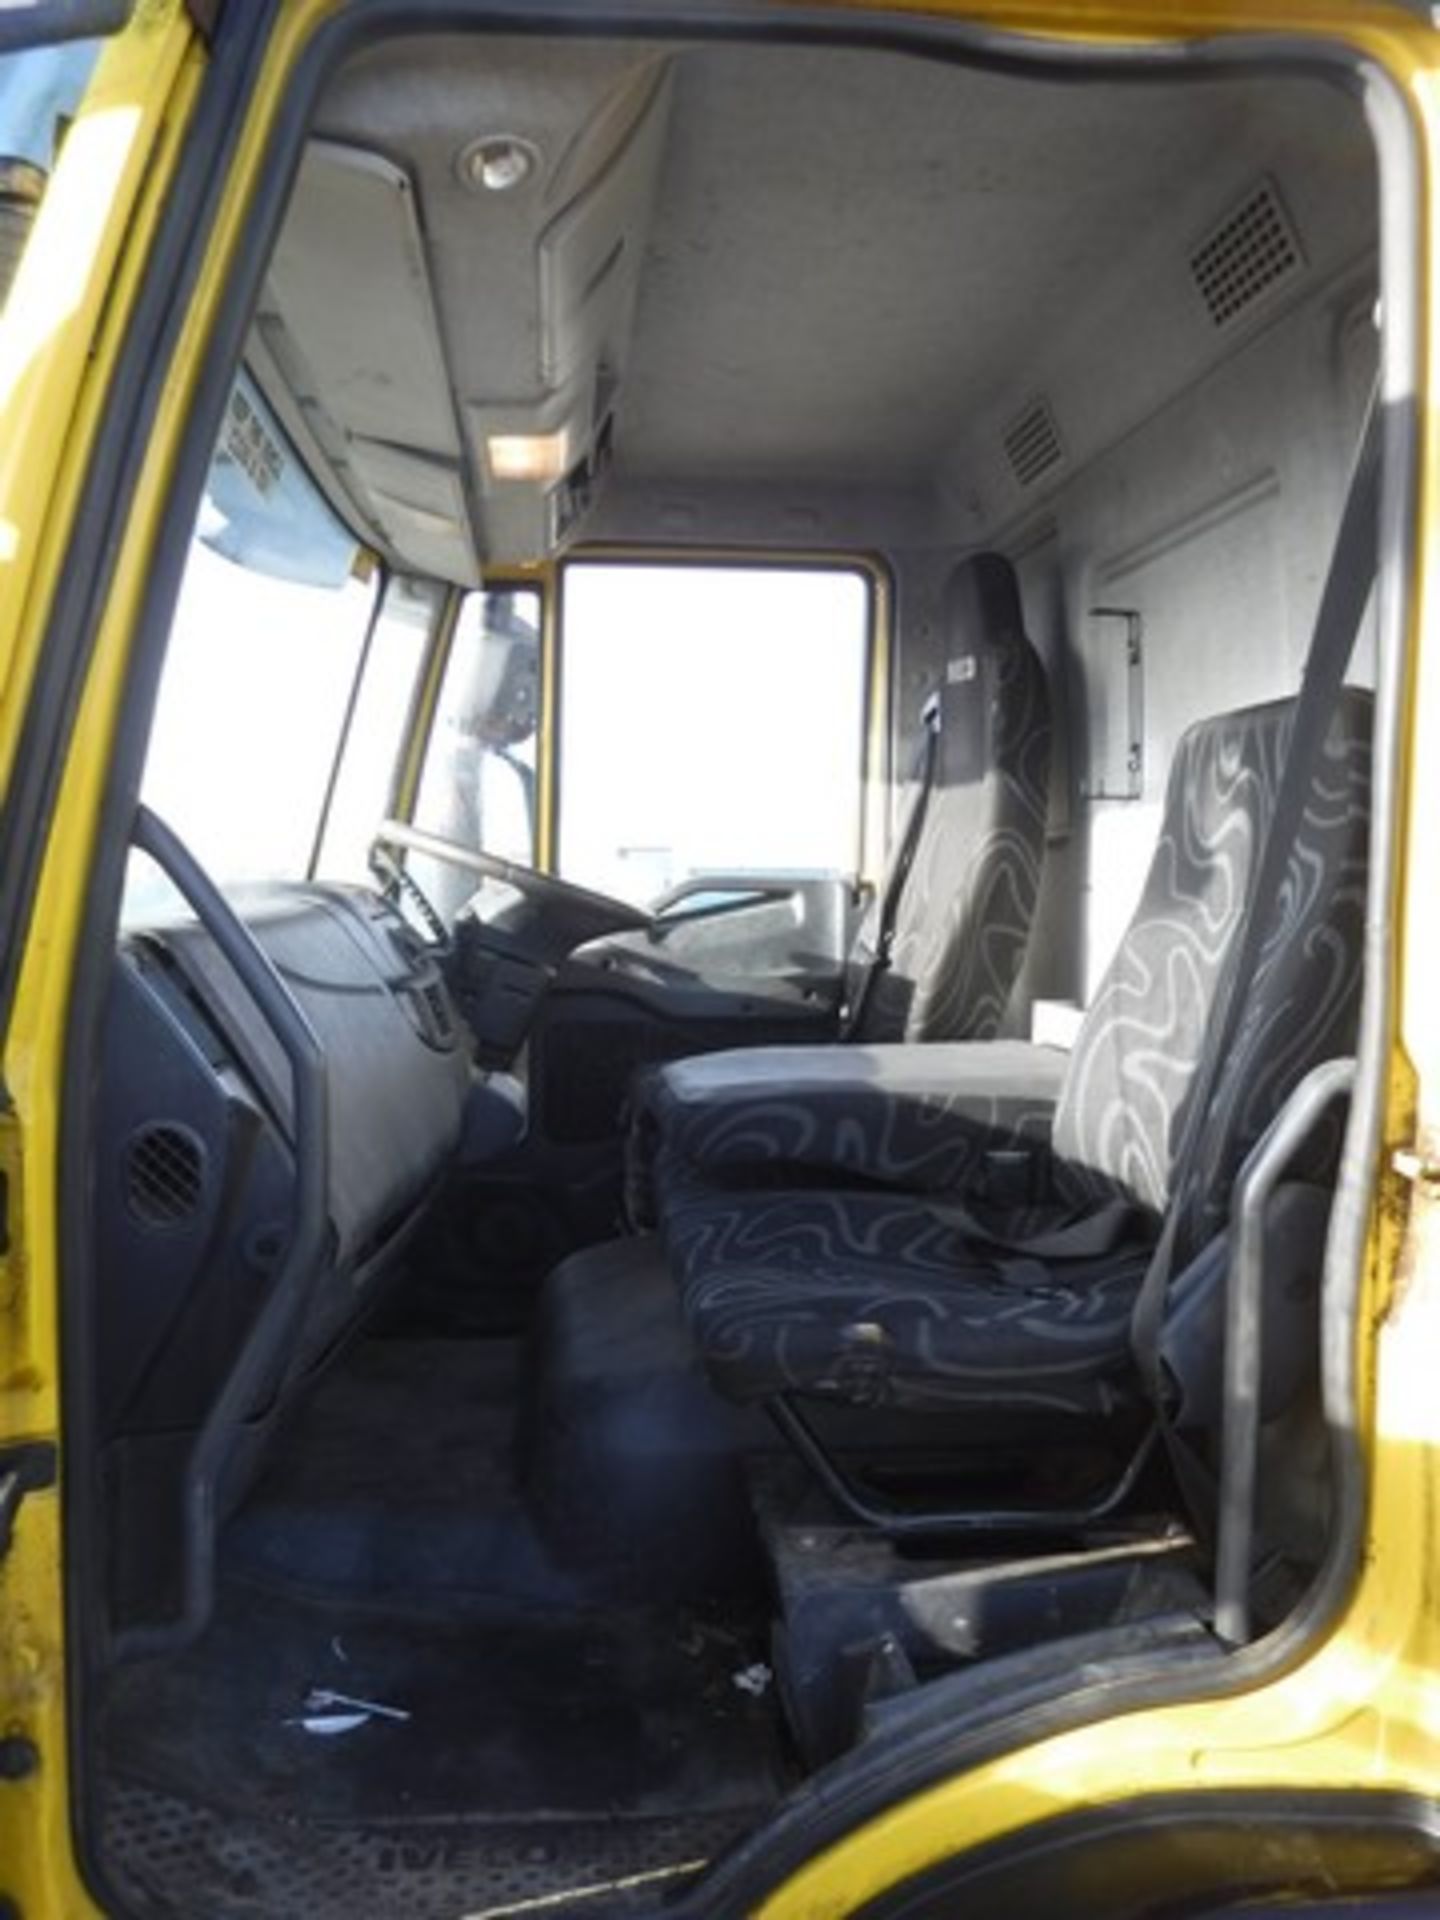 IVECO MODEL EUROCARGO (MY 2008) - 3920cc - Image 3 of 19